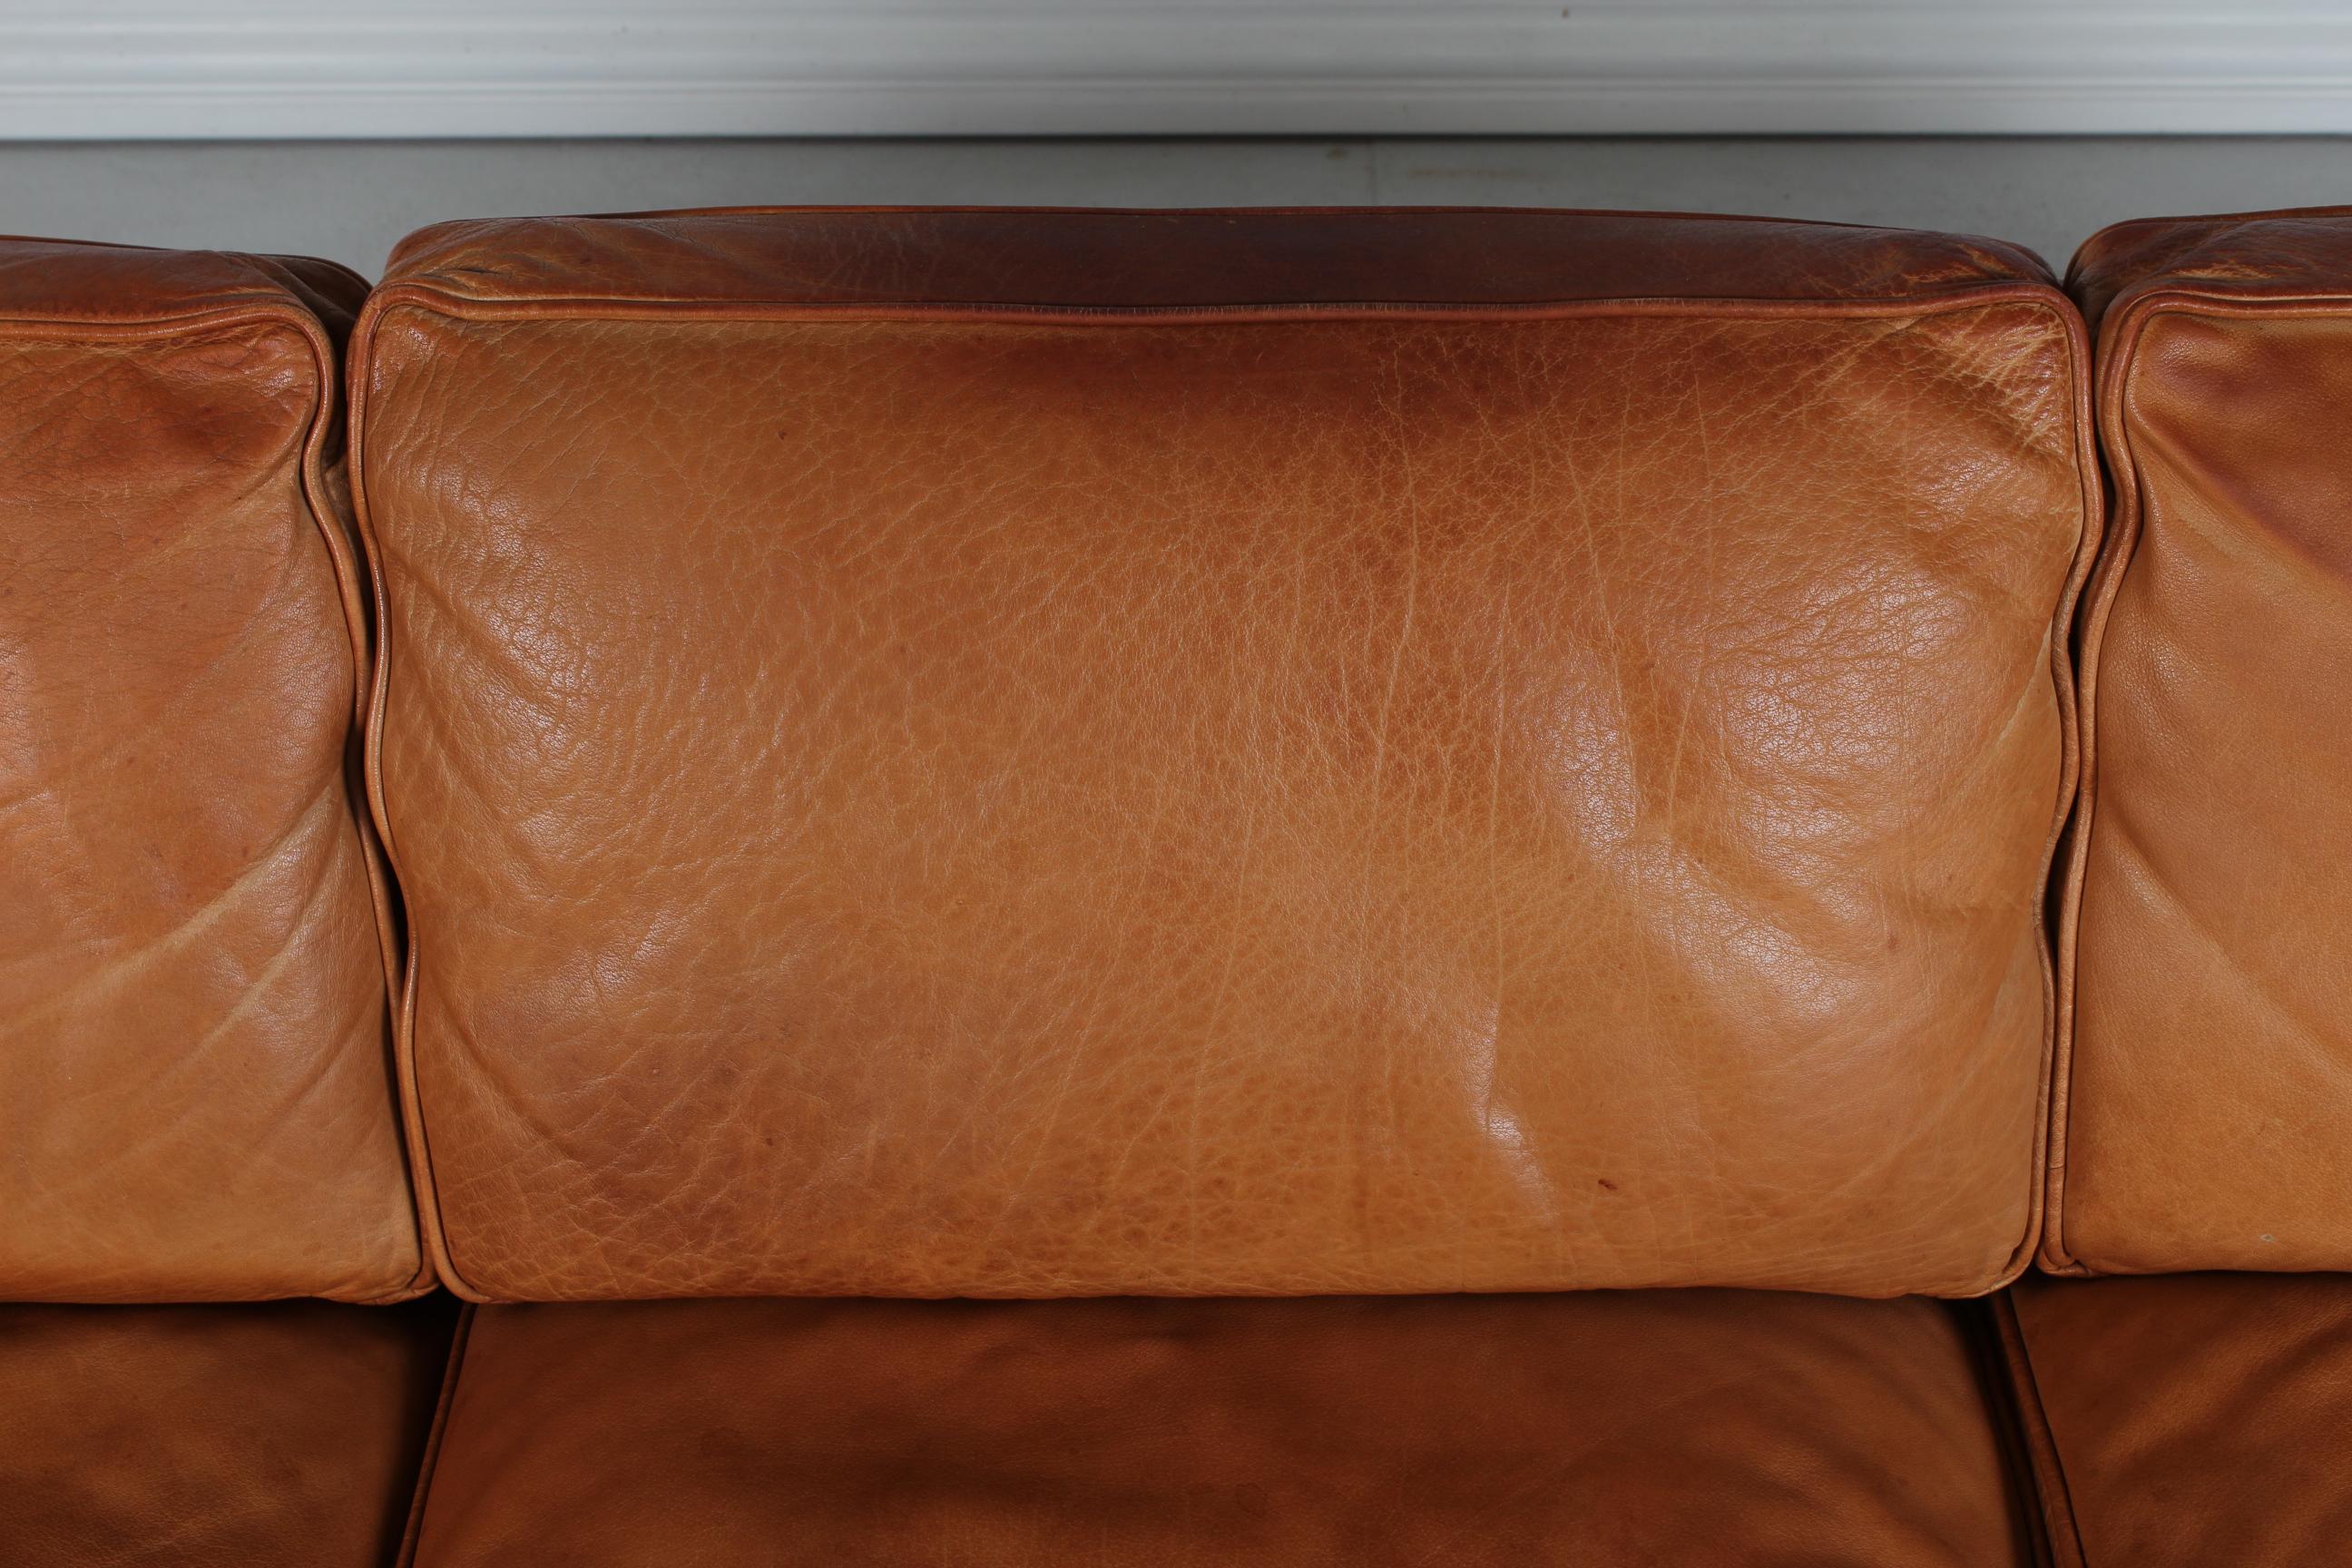 Danish Modern 3-Seat Sofa with Patinated Cognac-Colored Leather 1970s by Stouby 7